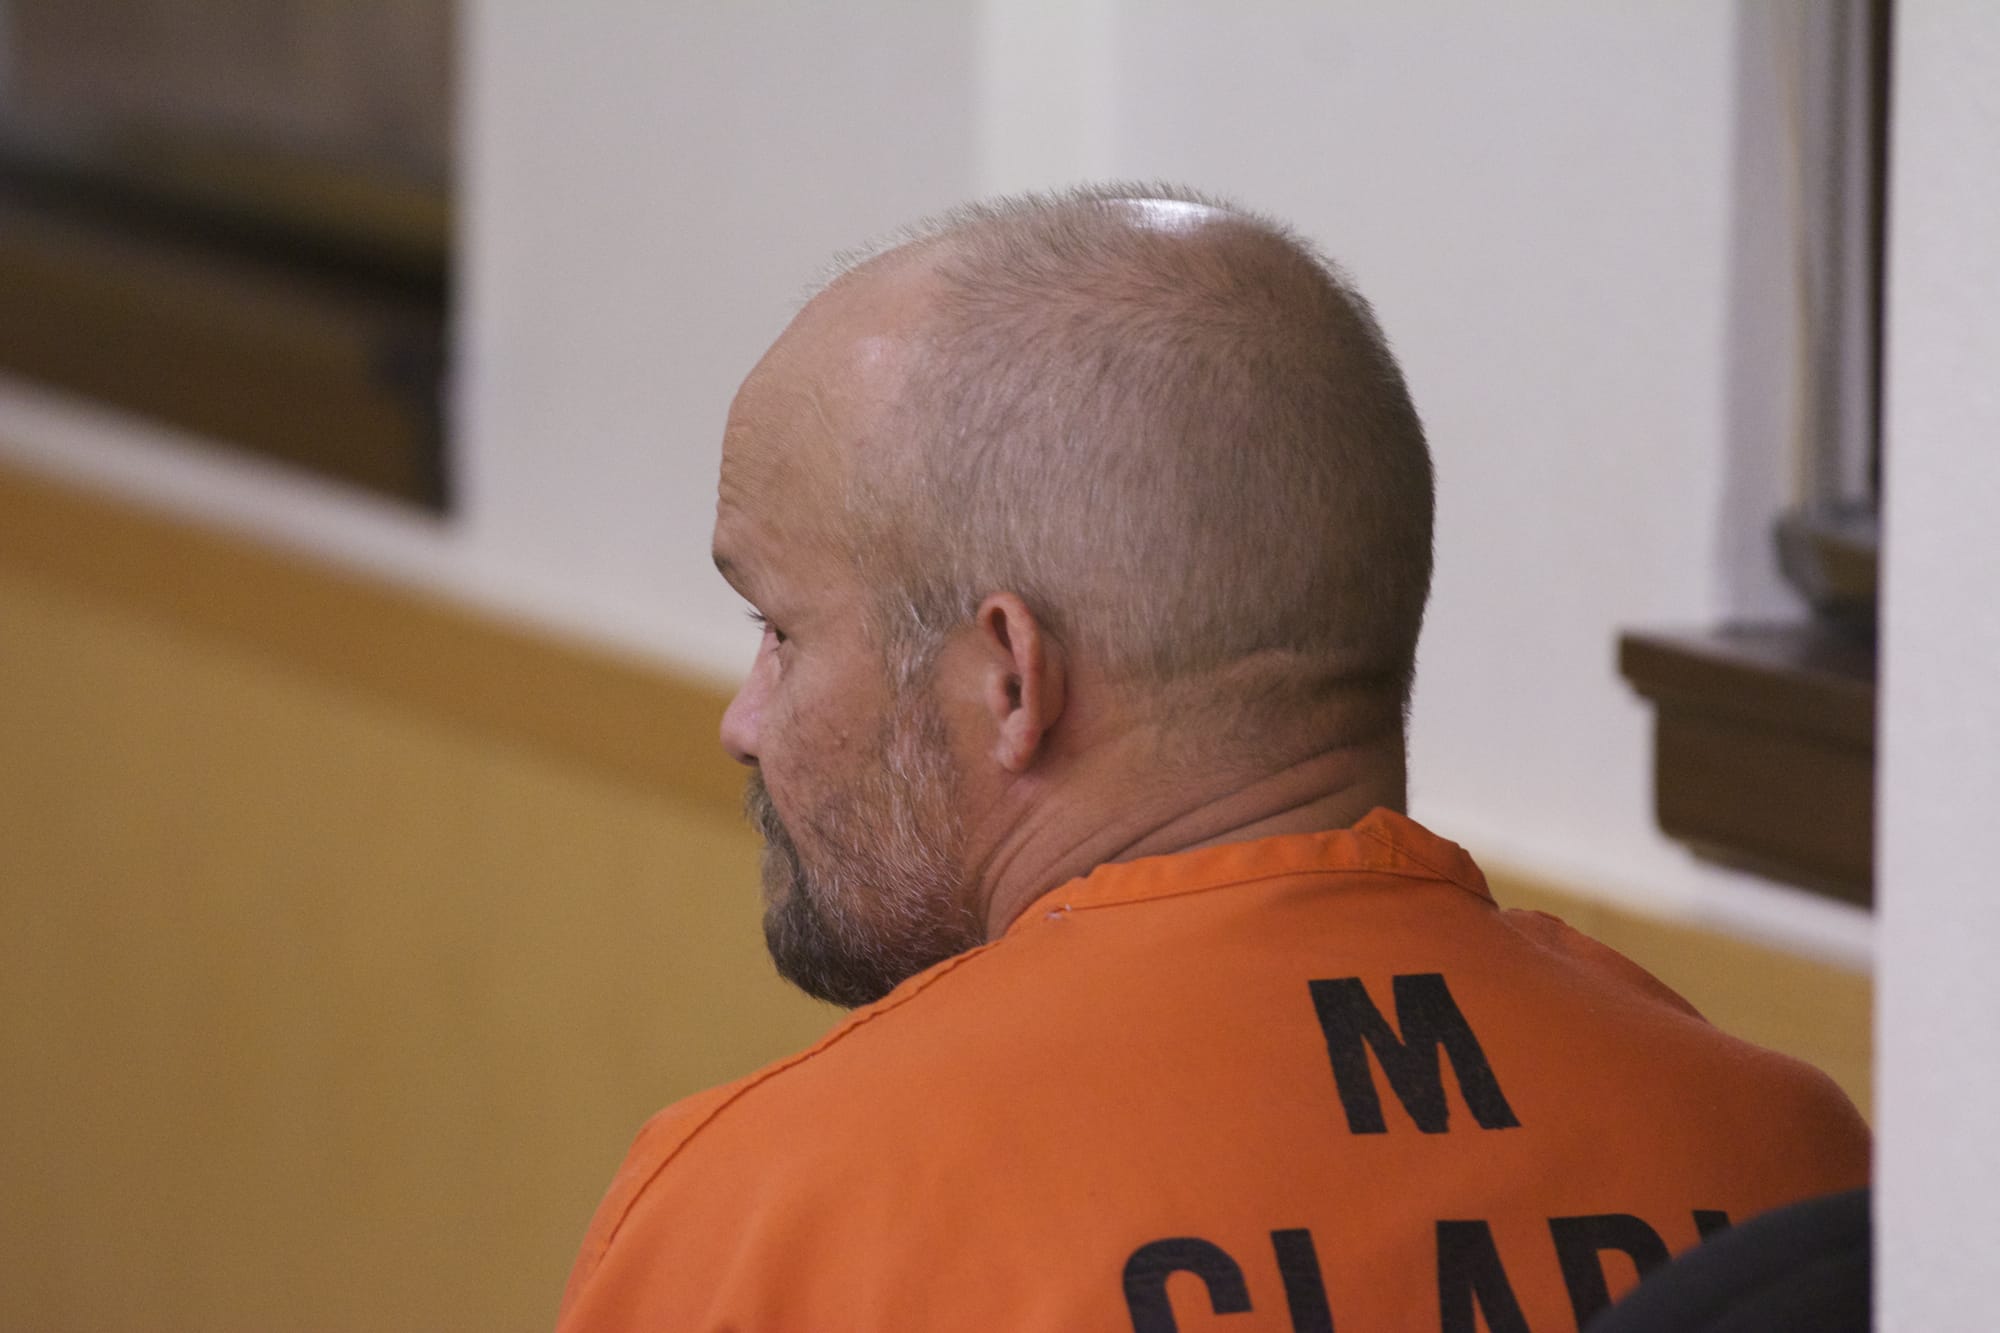 Ronald Ahlquist, 45, of Brush Prairie sits in Clark County Superior Court on Friday before entering a plea of not guilty to manslaughter of his elderly father, who died of malnutrition.